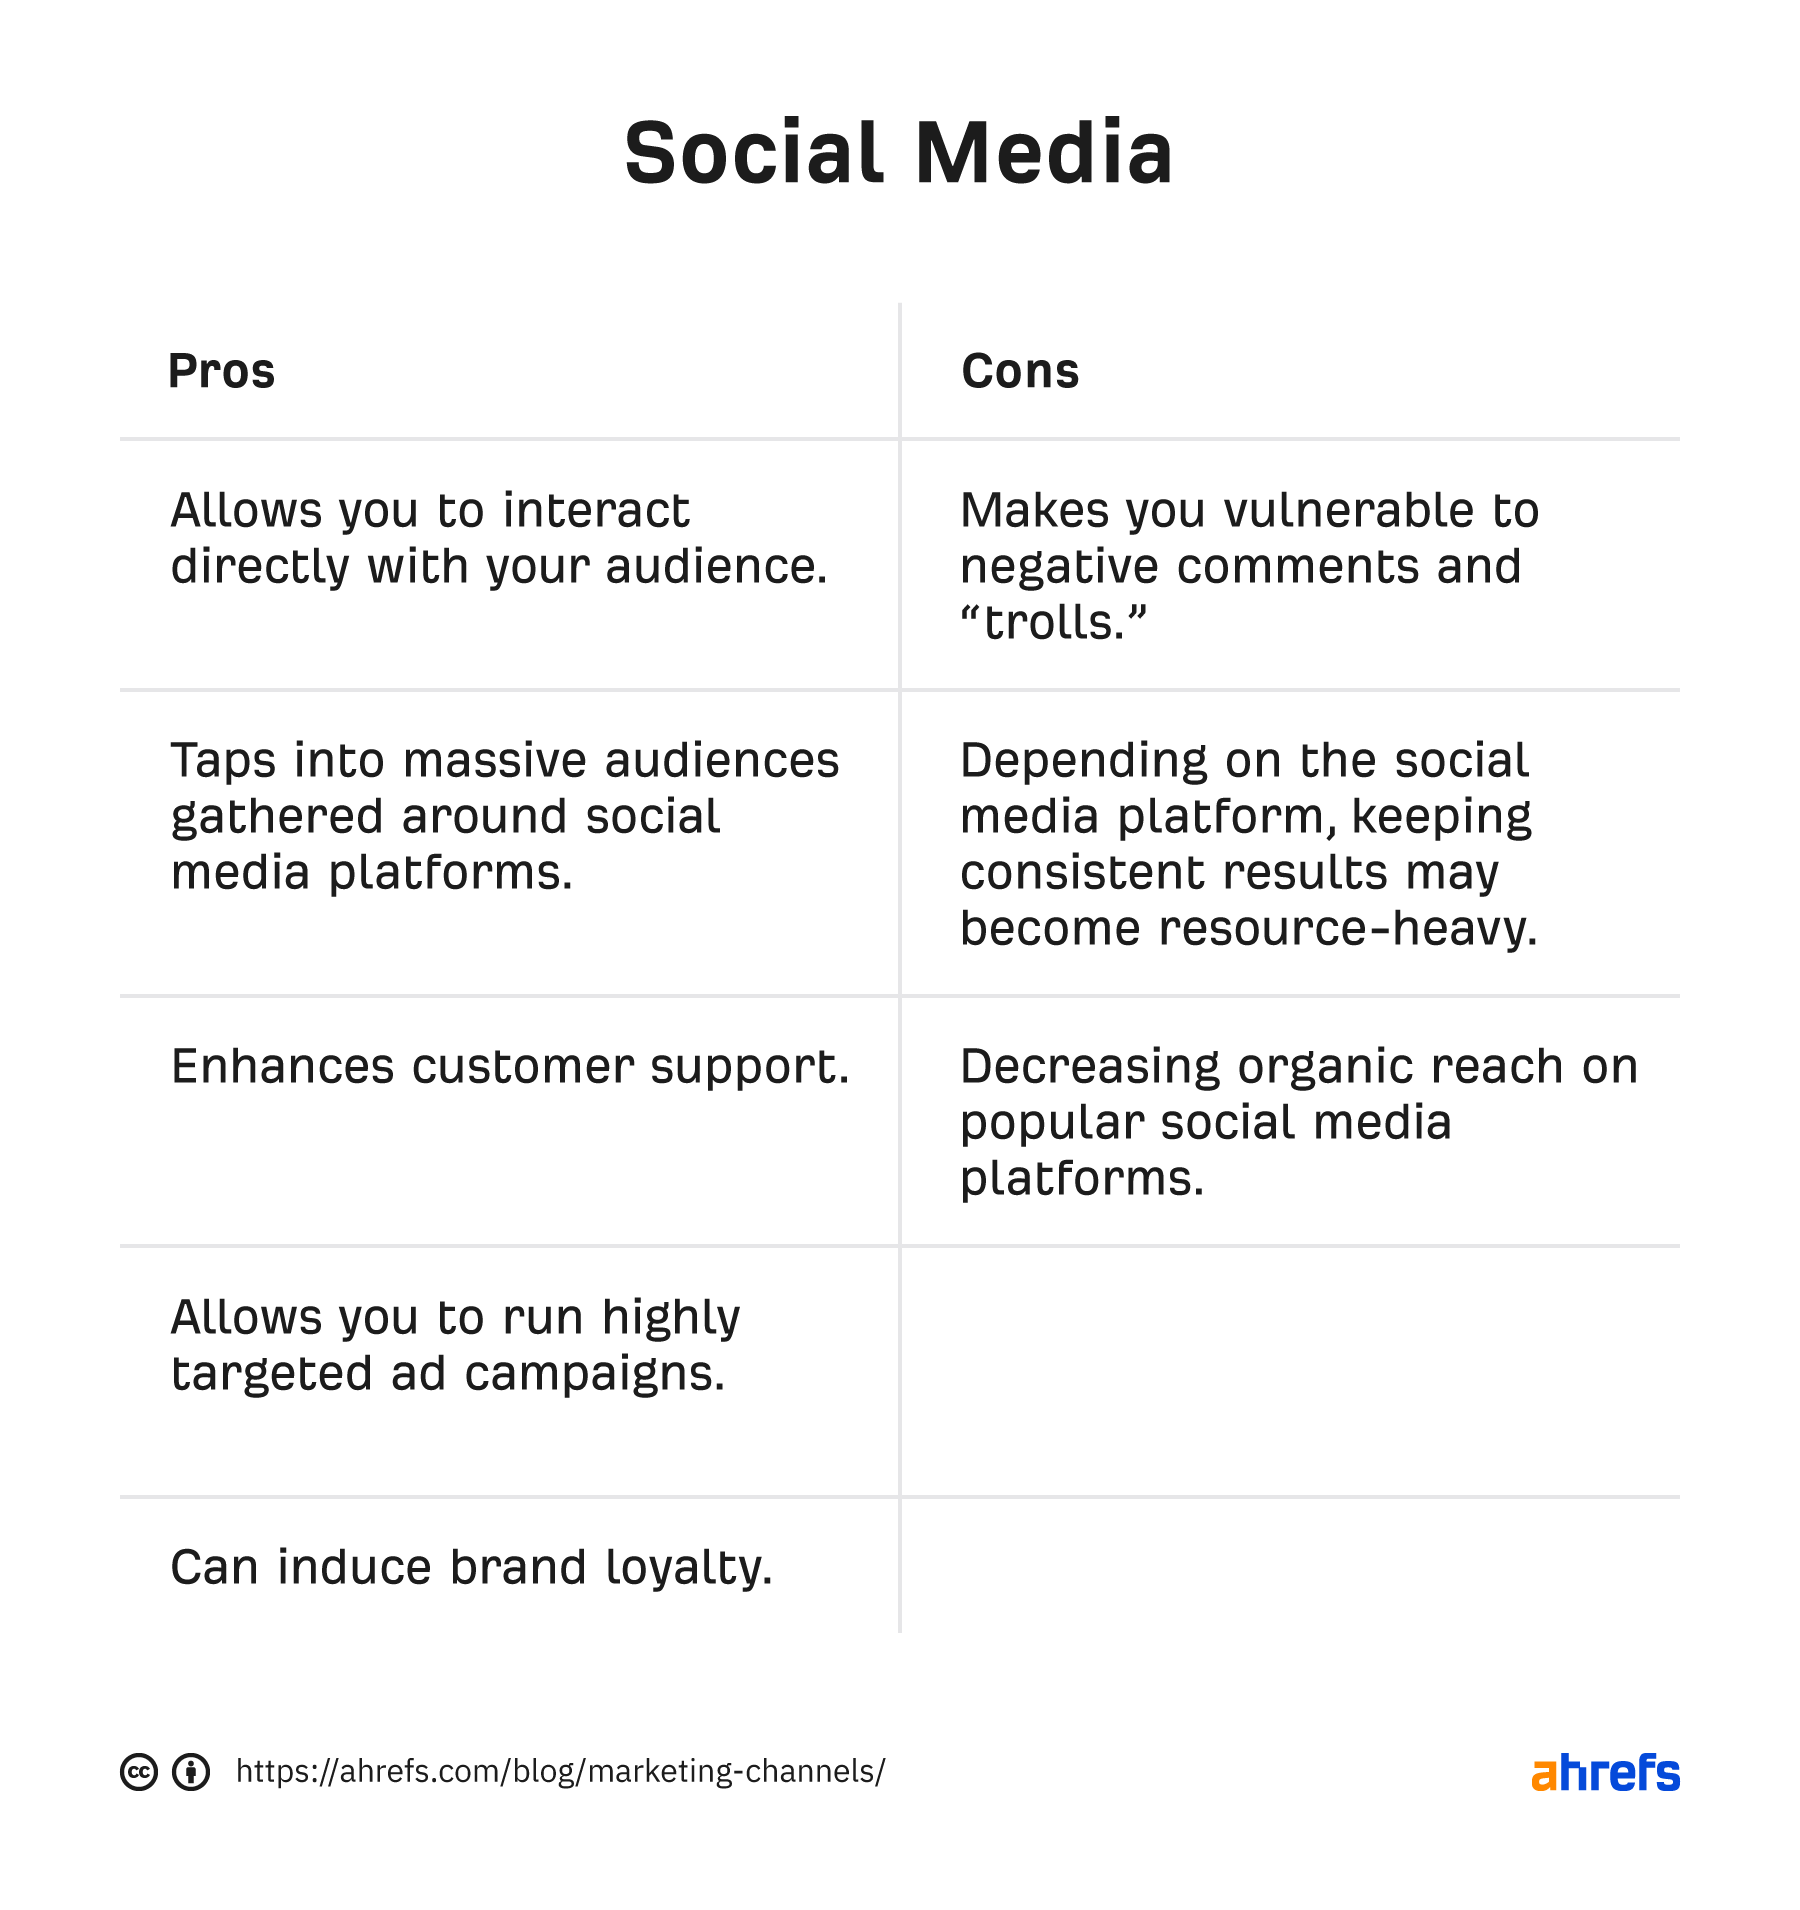 Pros and cons of social media